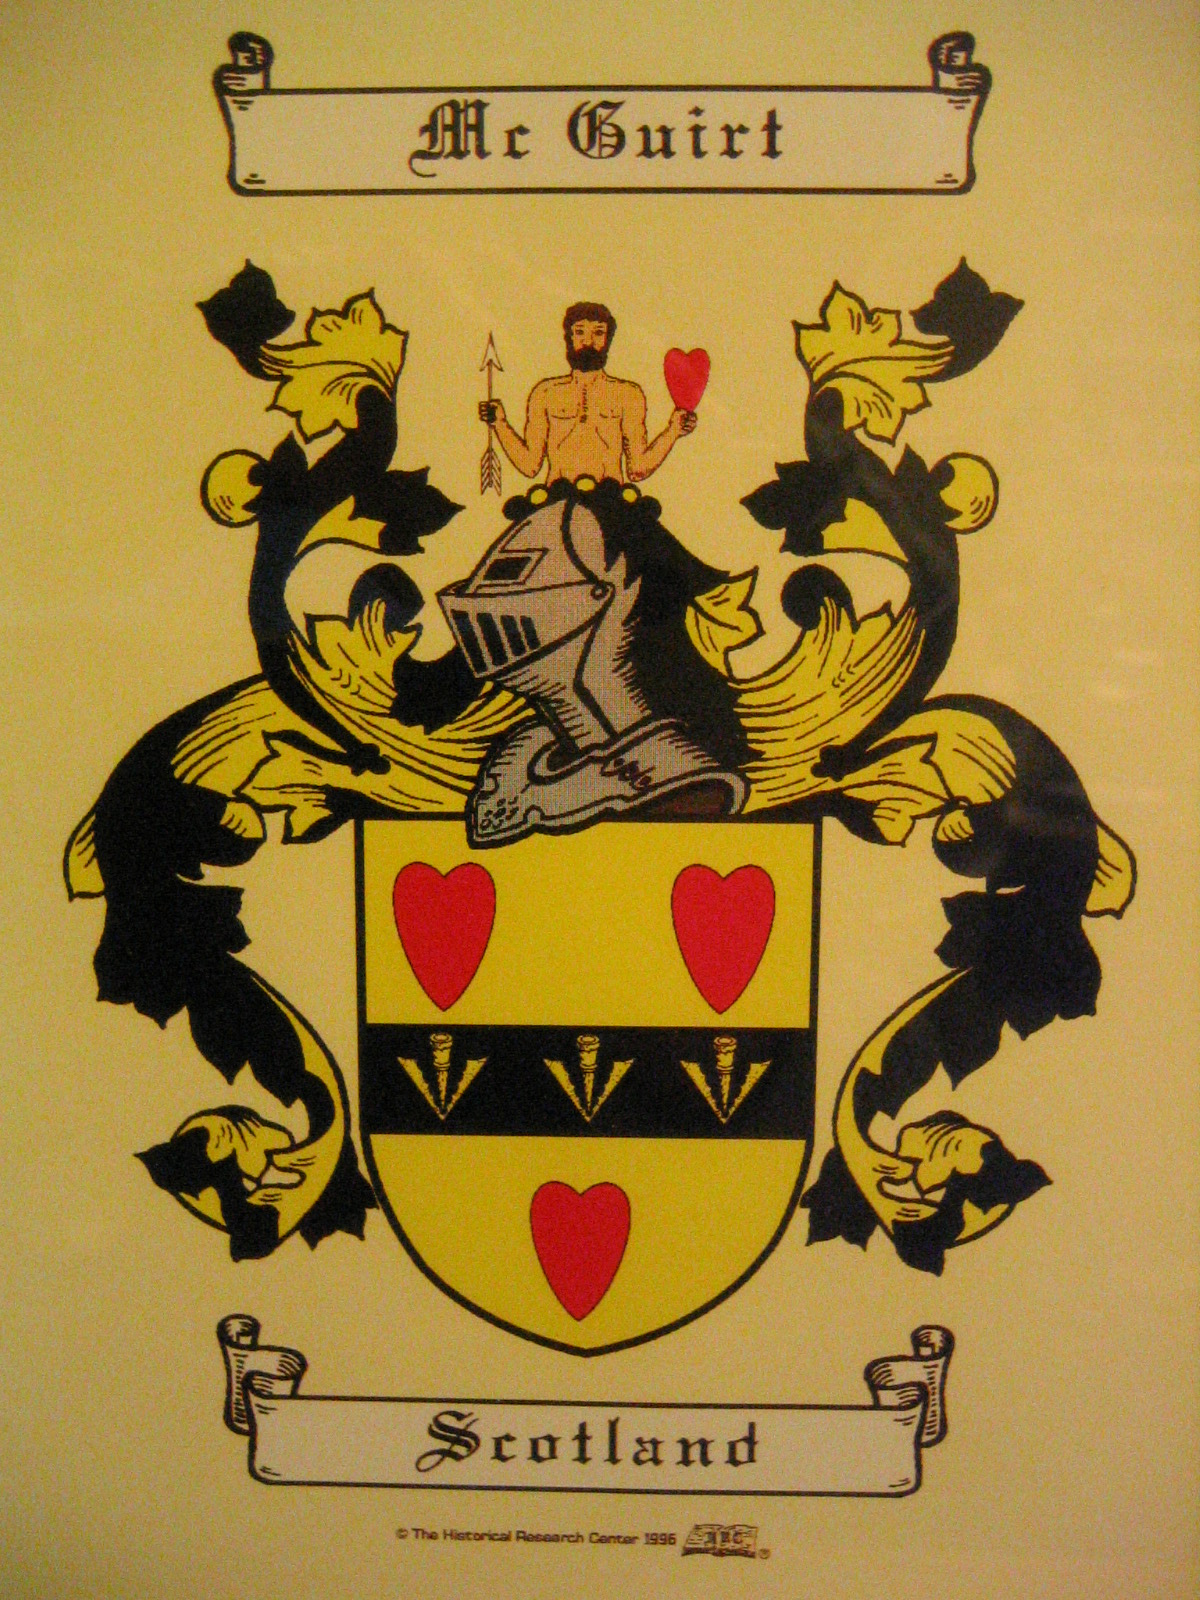 McGuirt Coat of Arms